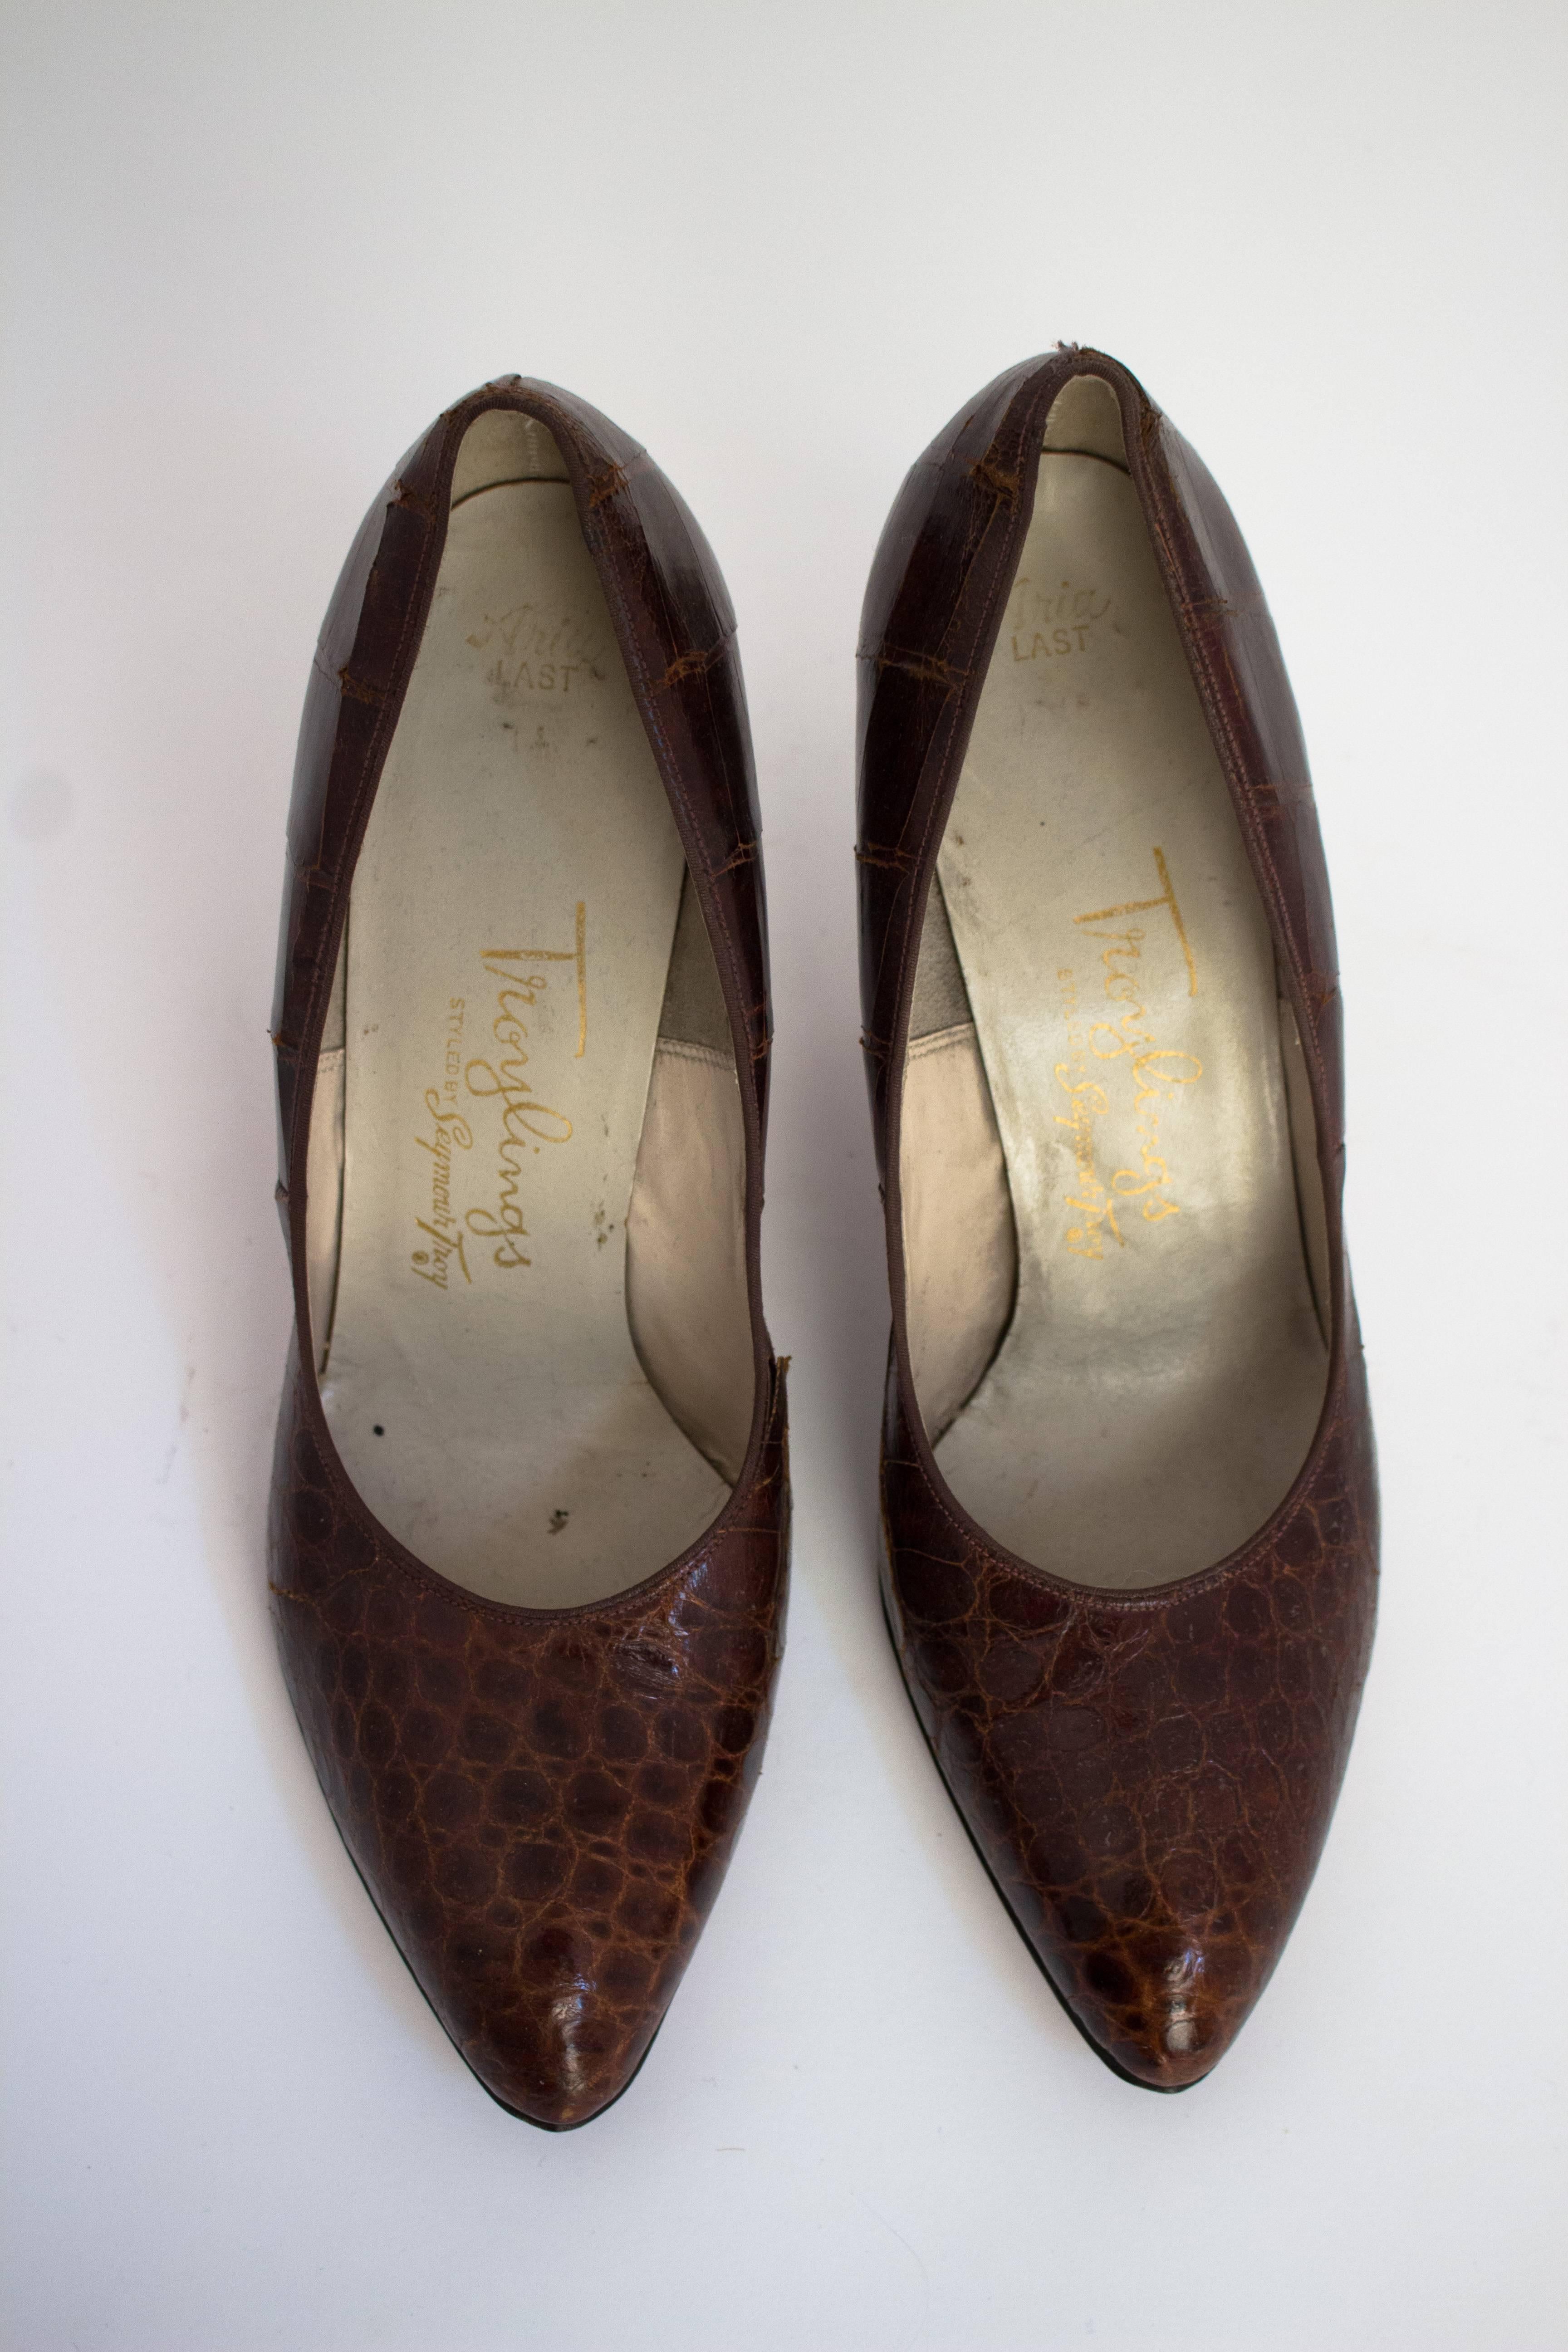 1950s alligator heels. Leather soles. Apox. US size 8.

Palm of foot: 3